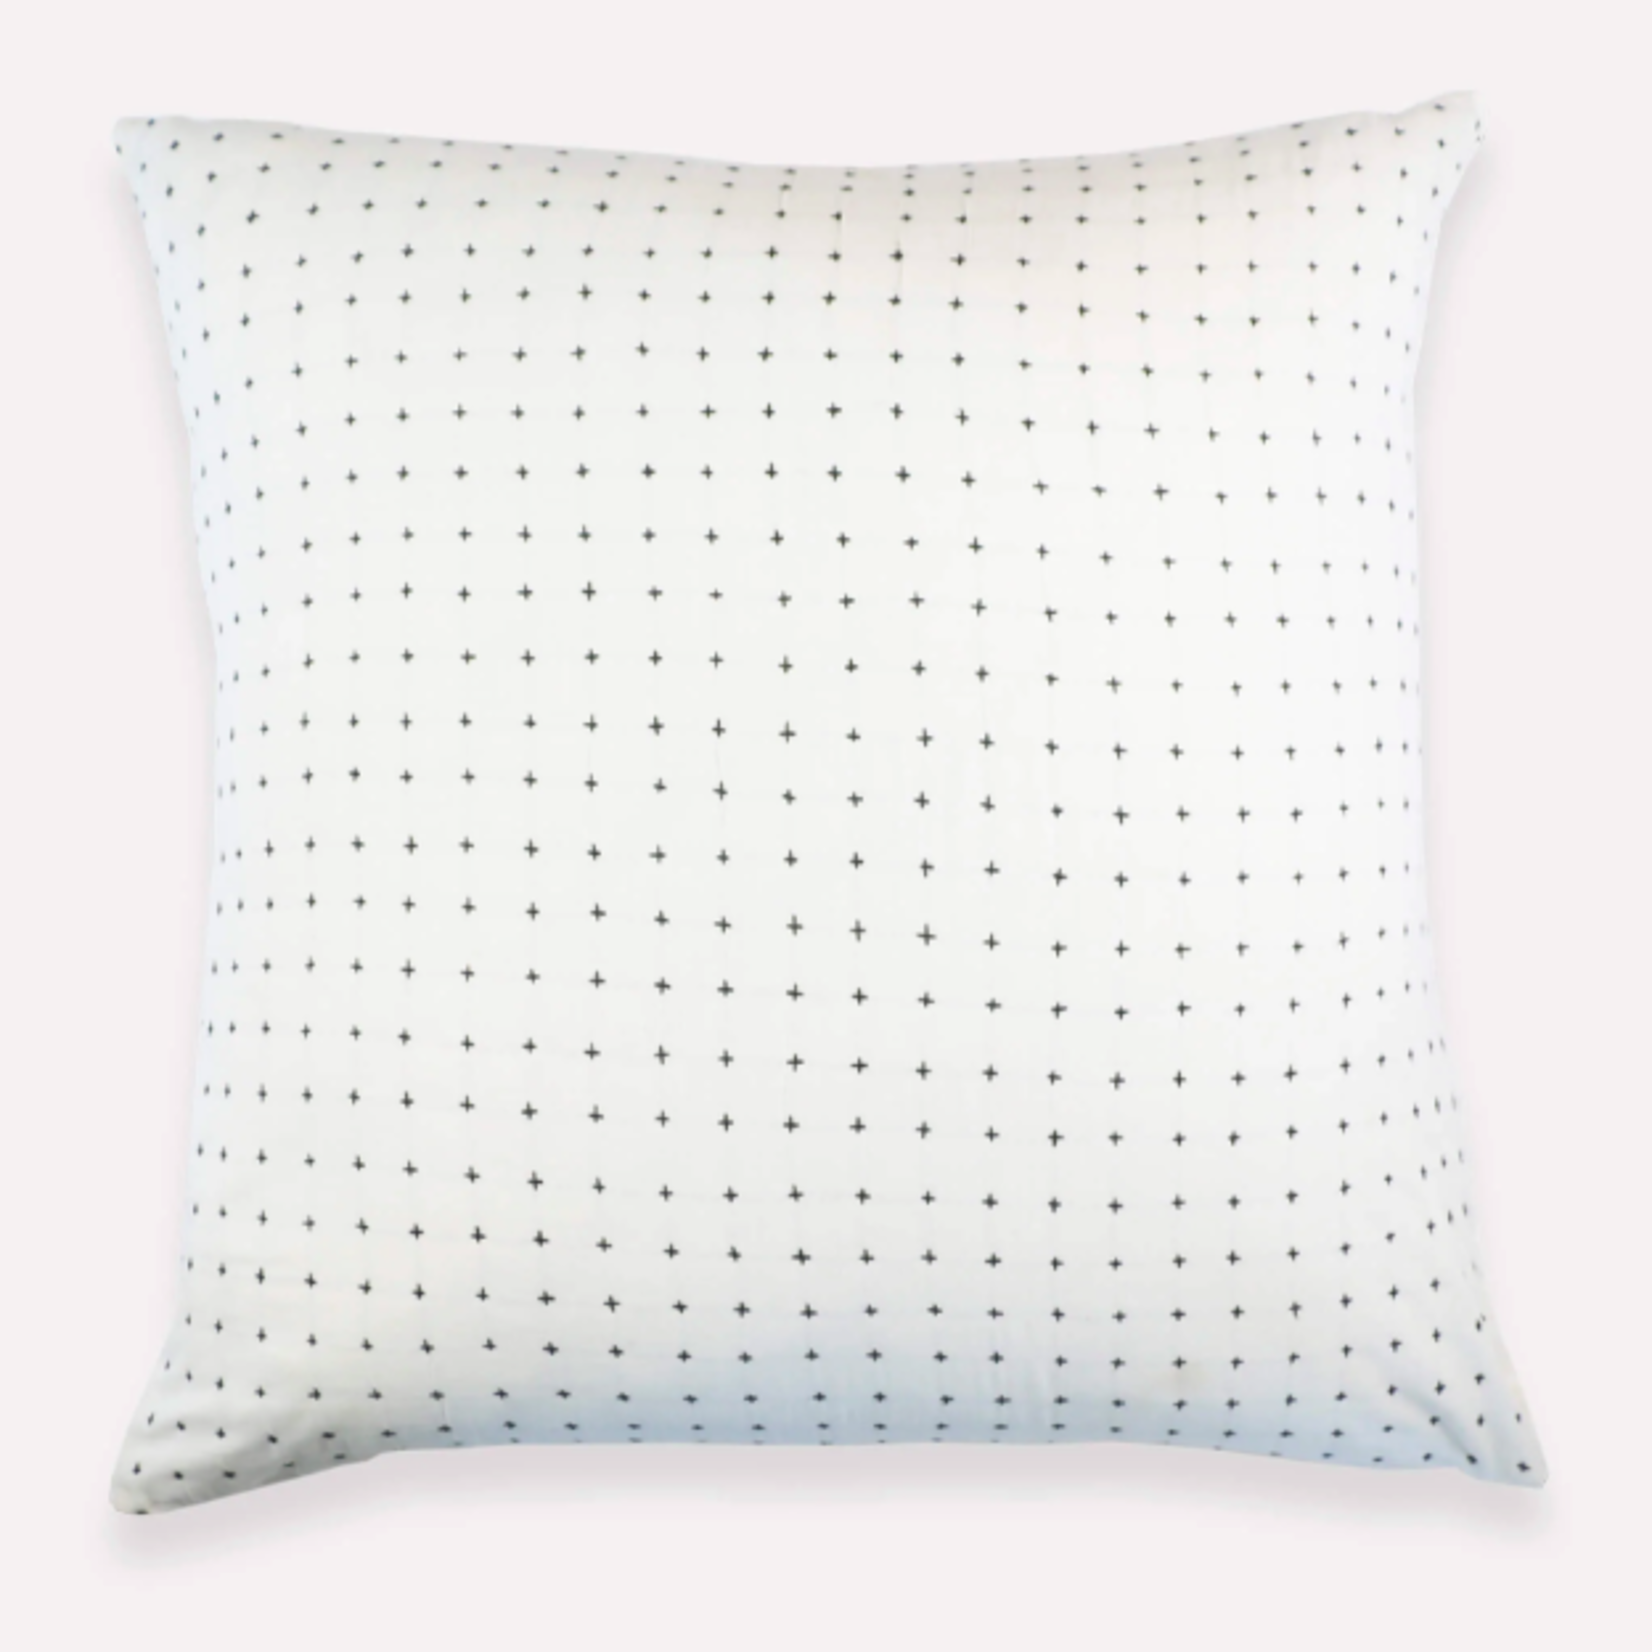 Anchal Anchal Cross-Stitch Throw Pillow, 22" x 22"